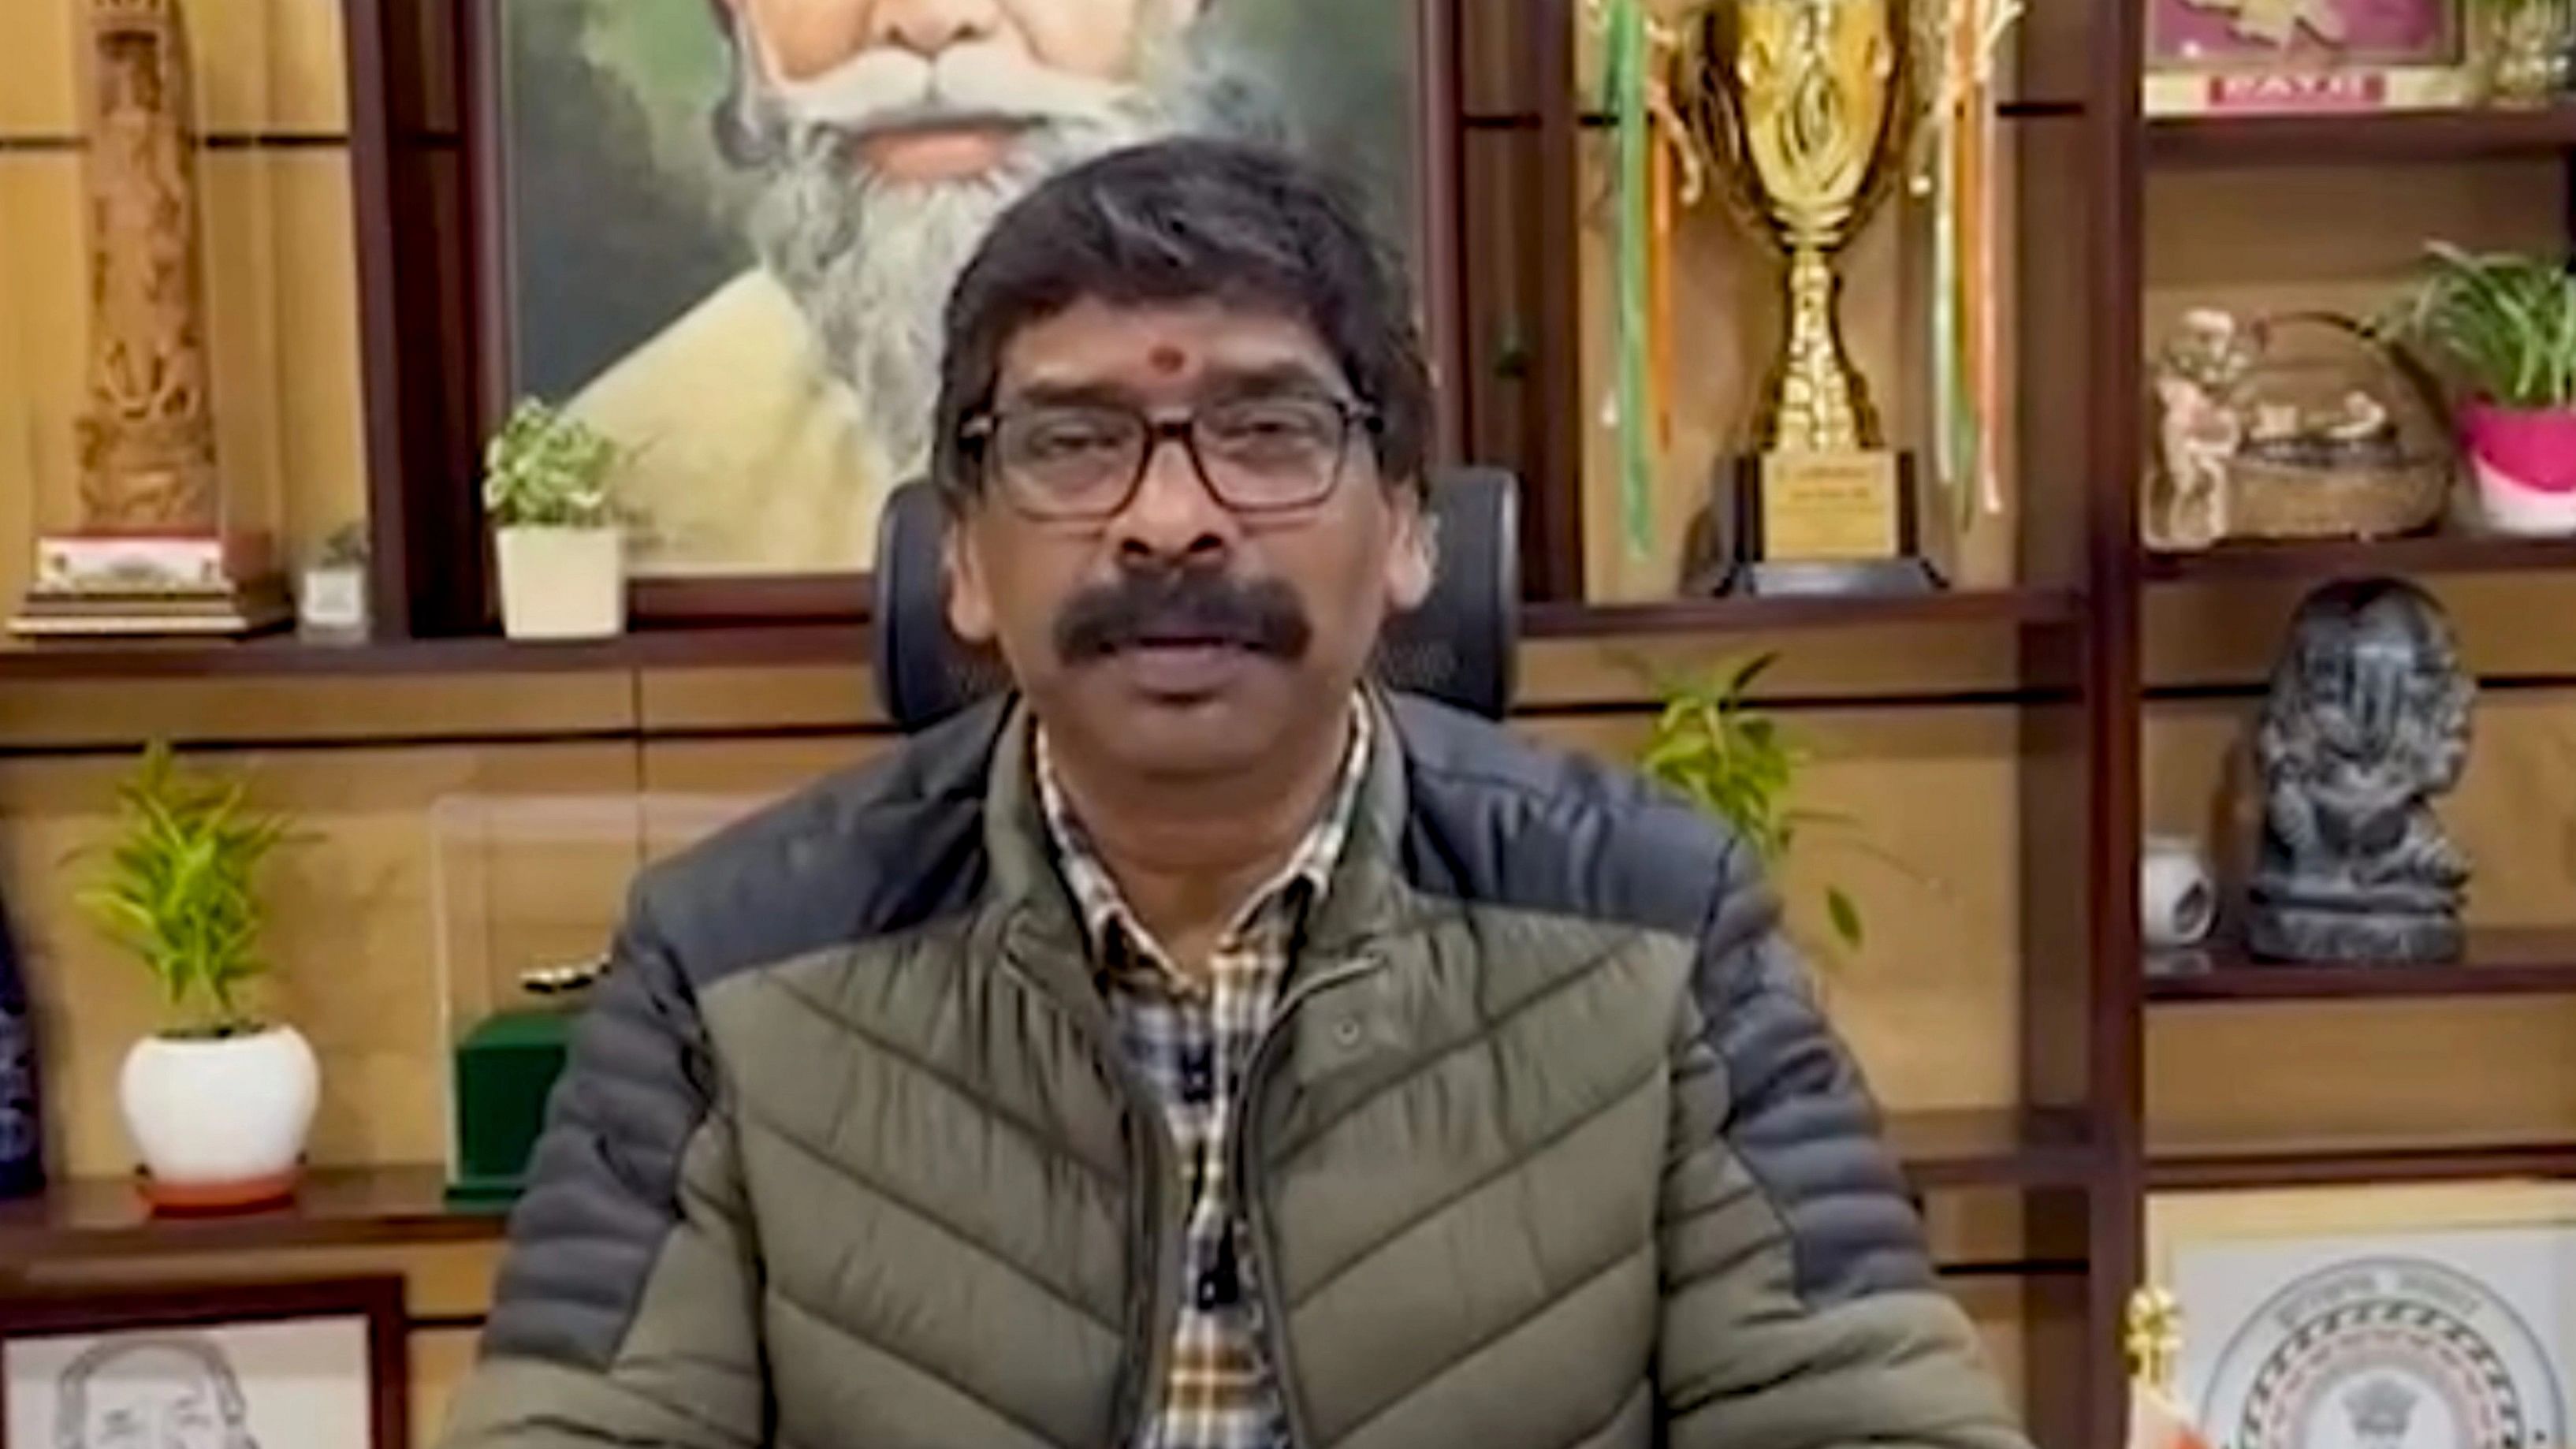 <div class="paragraphs"><p>Jharkhand former Chief Minister Hemant Soren delivers a video message before his arrest by Enforcement Directorate (ED) officials in connection with a money laundering case.</p></div>